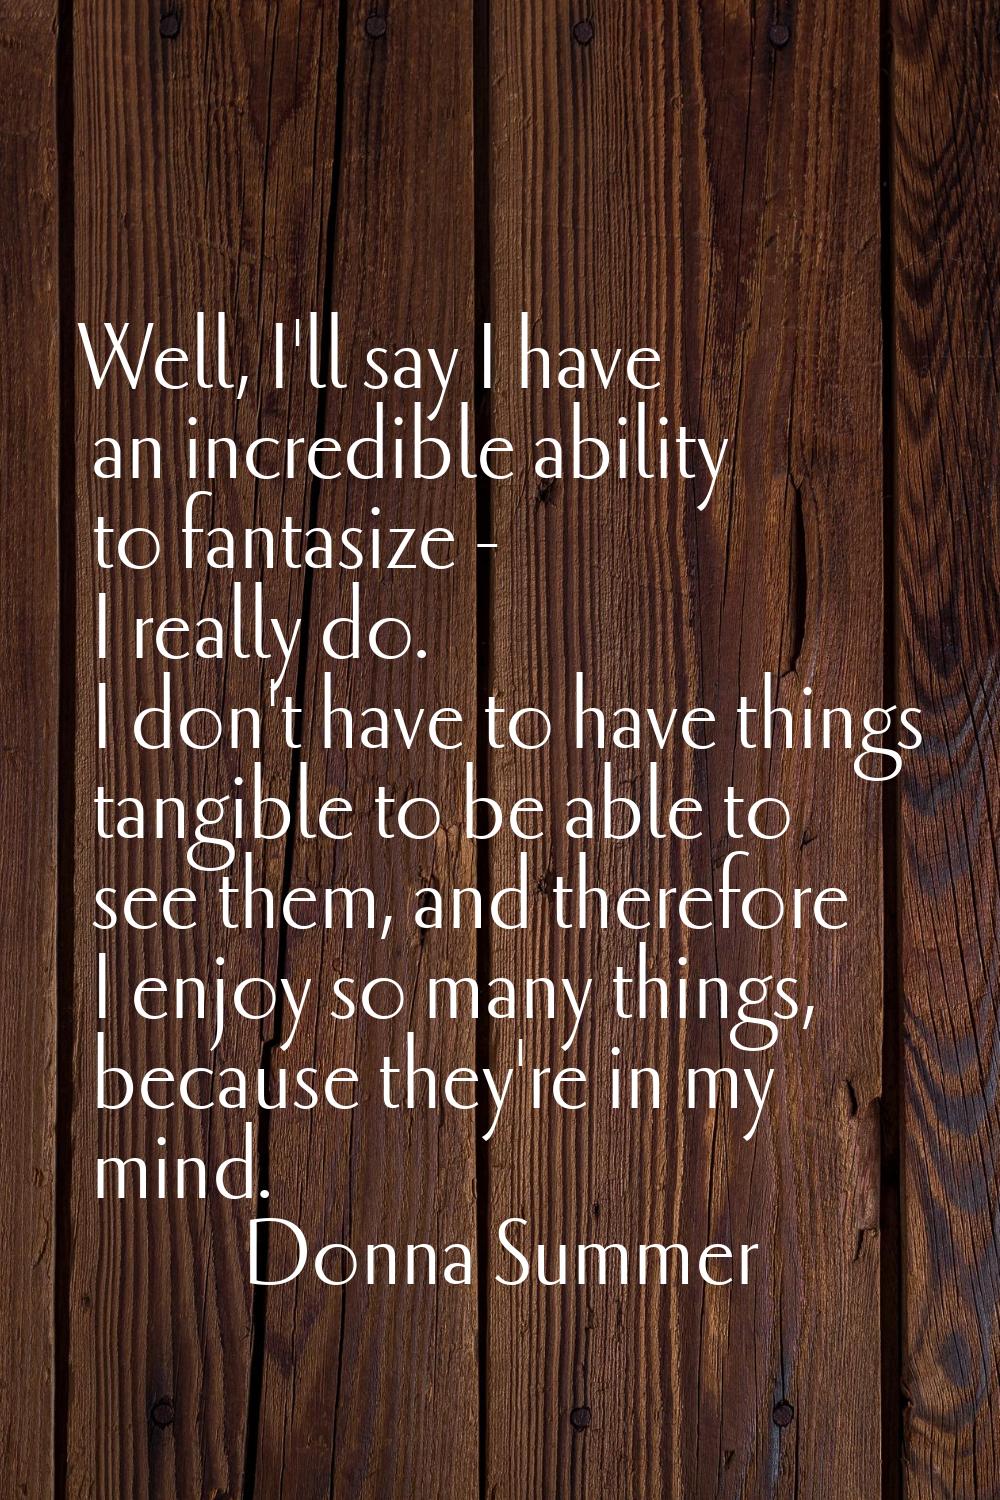 Well, I'll say I have an incredible ability to fantasize - I really do. I don't have to have things